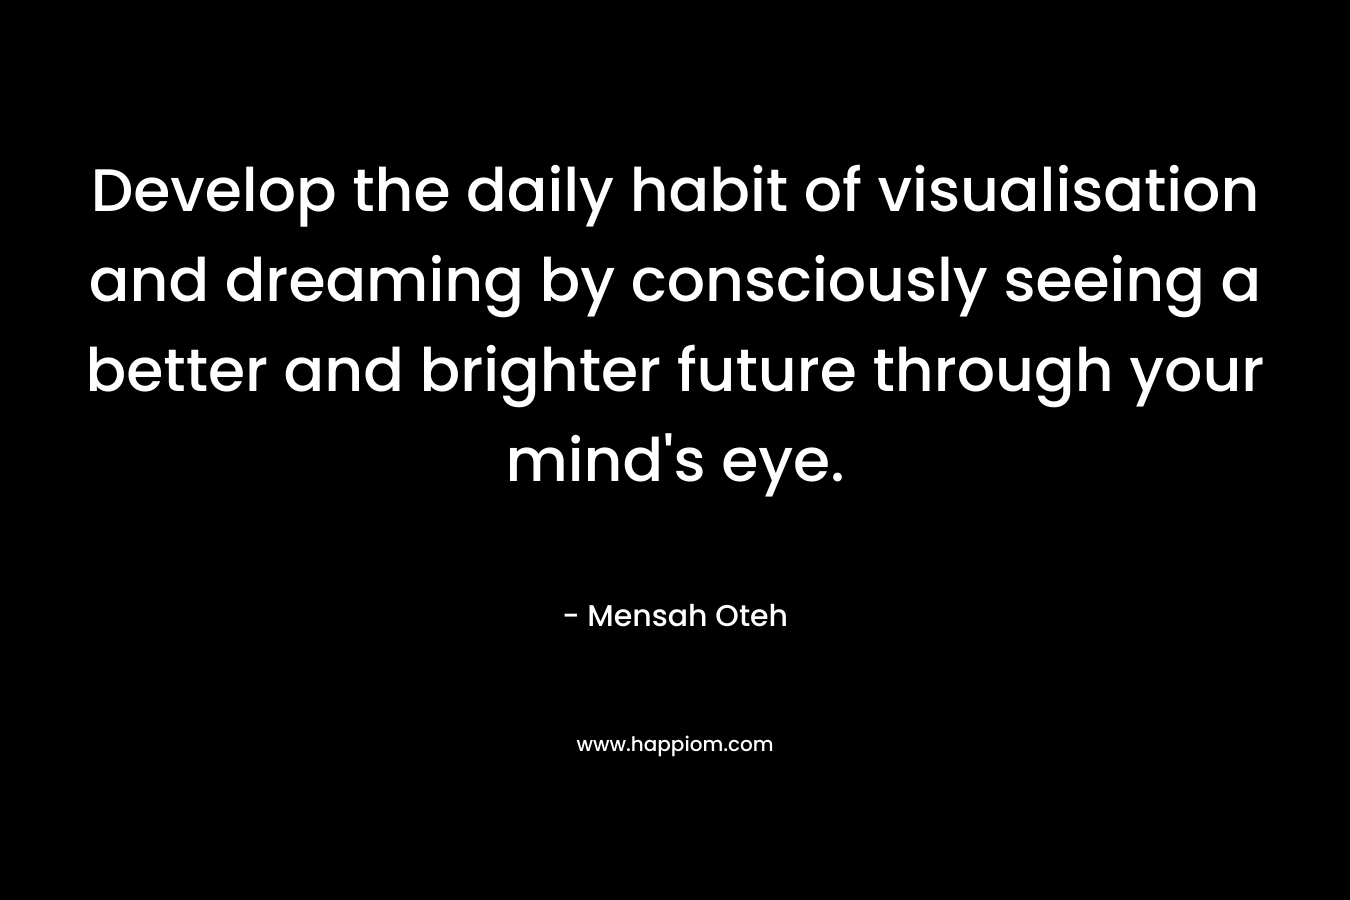 Develop the daily habit of visualisation and dreaming by consciously seeing a better and brighter future through your mind's eye.